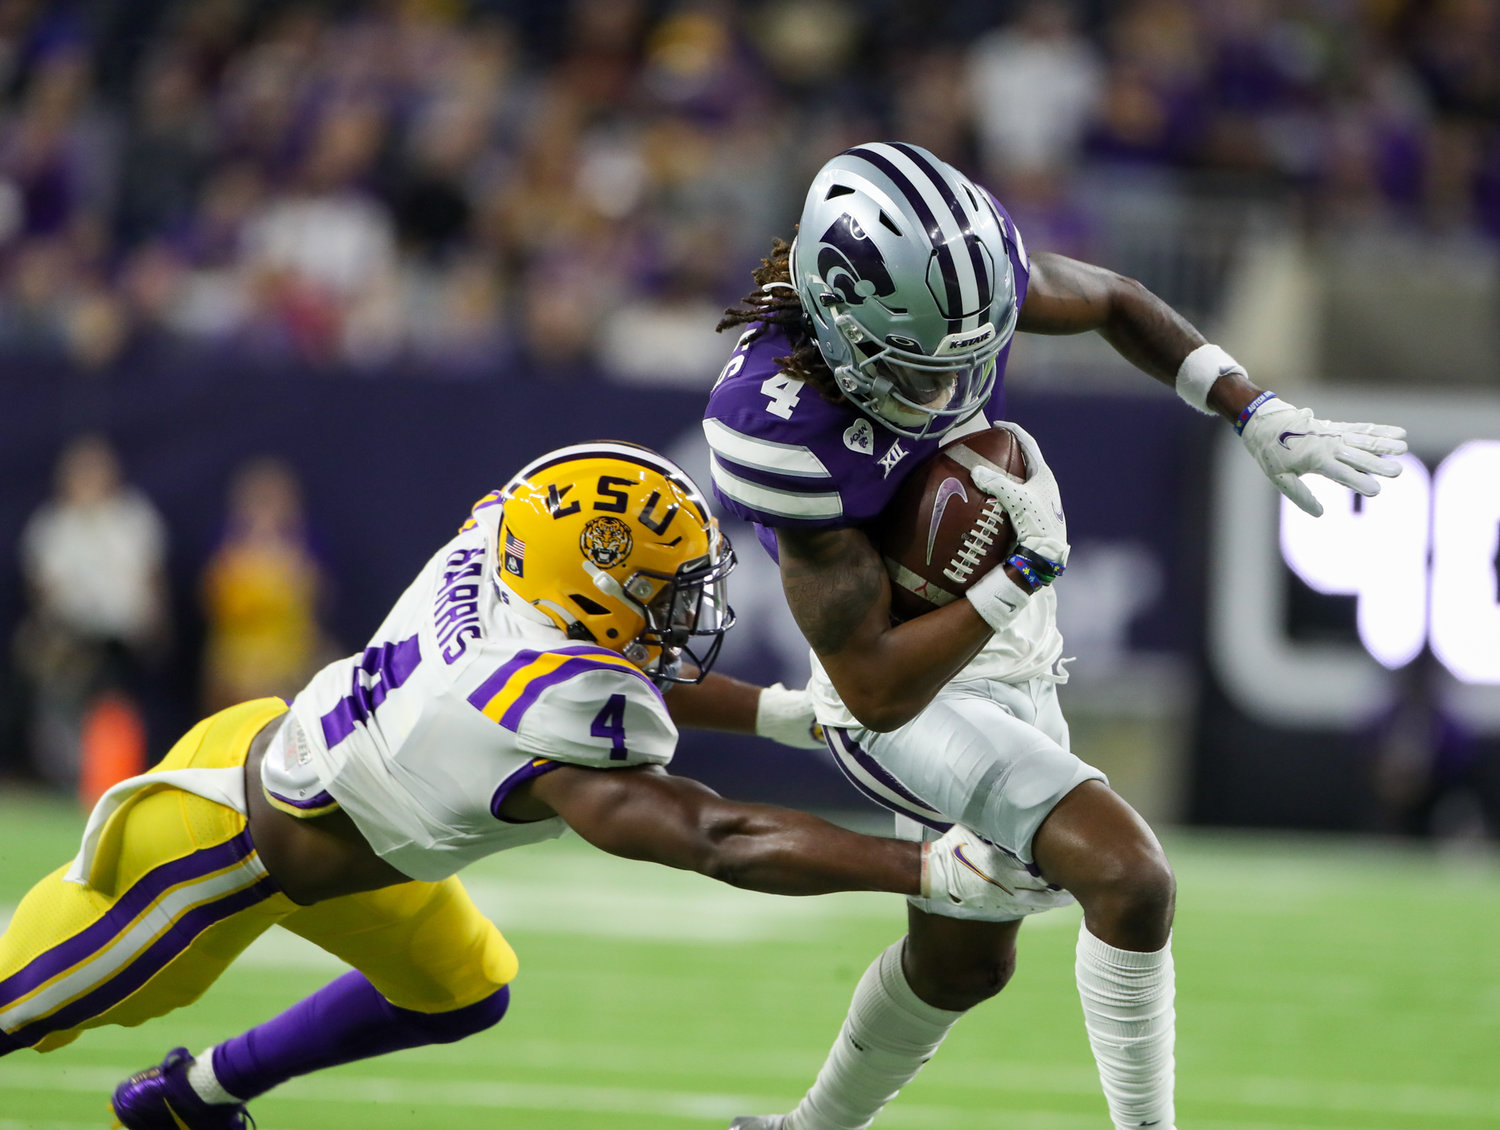 Kansas State Wildcats wide receiver Malik Knowles (4) carries the ball past LSU Tigers safety Todd Harris Jr. (4) during the TaxAct Texas Bowl on Jan. 4, 2022 in Houston, Texas.